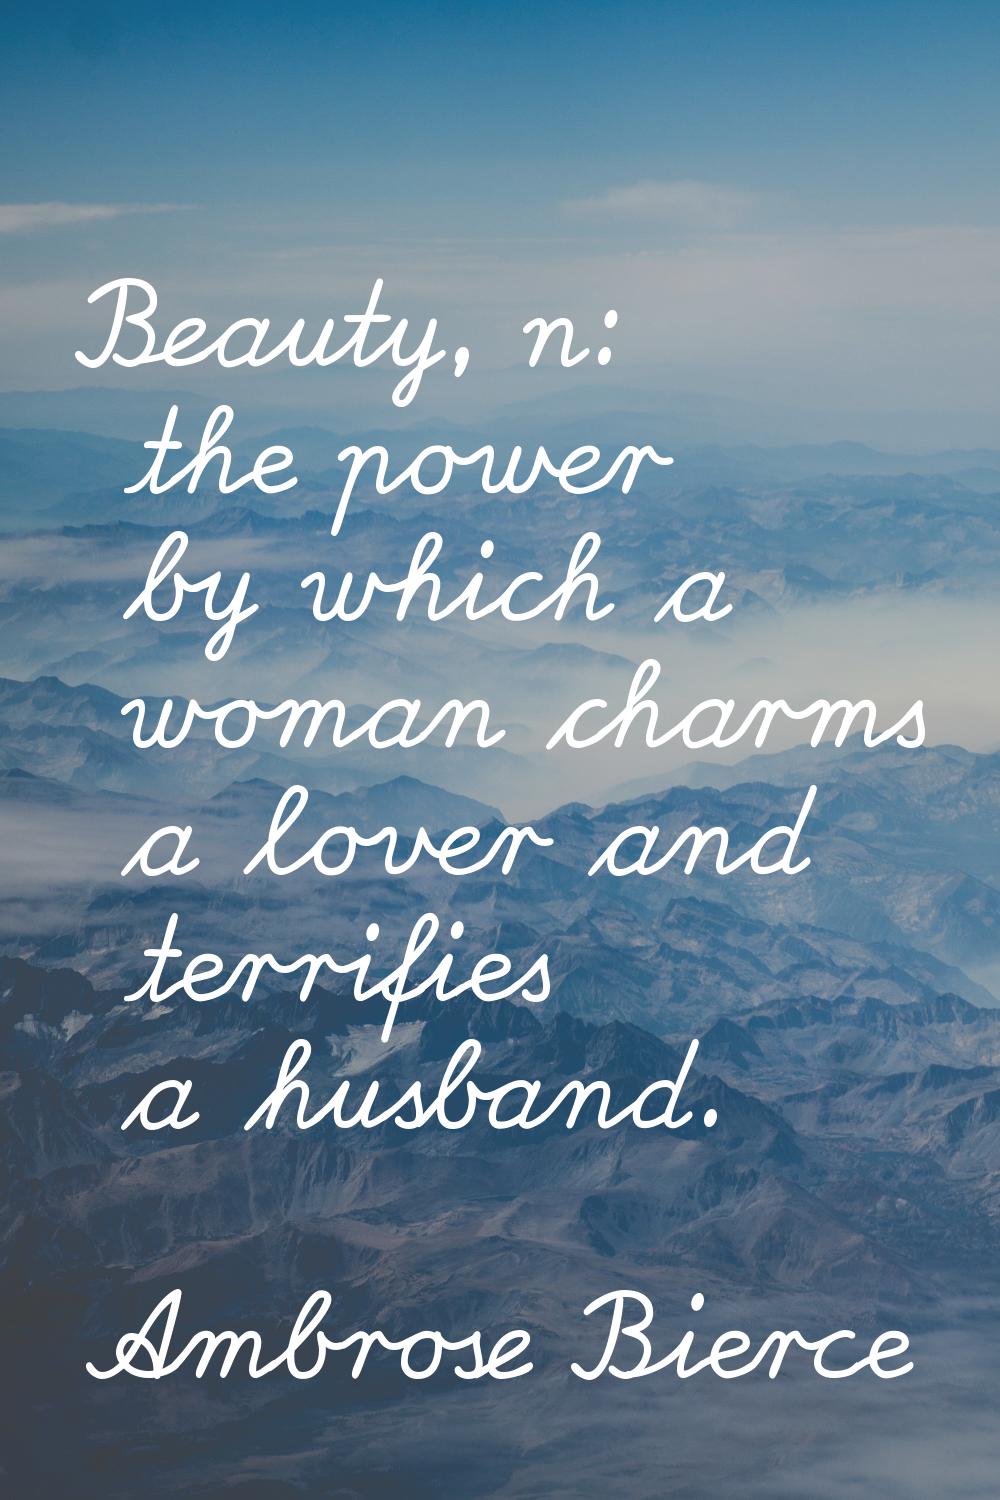 Beauty, n: the power by which a woman charms a lover and terrifies a husband.